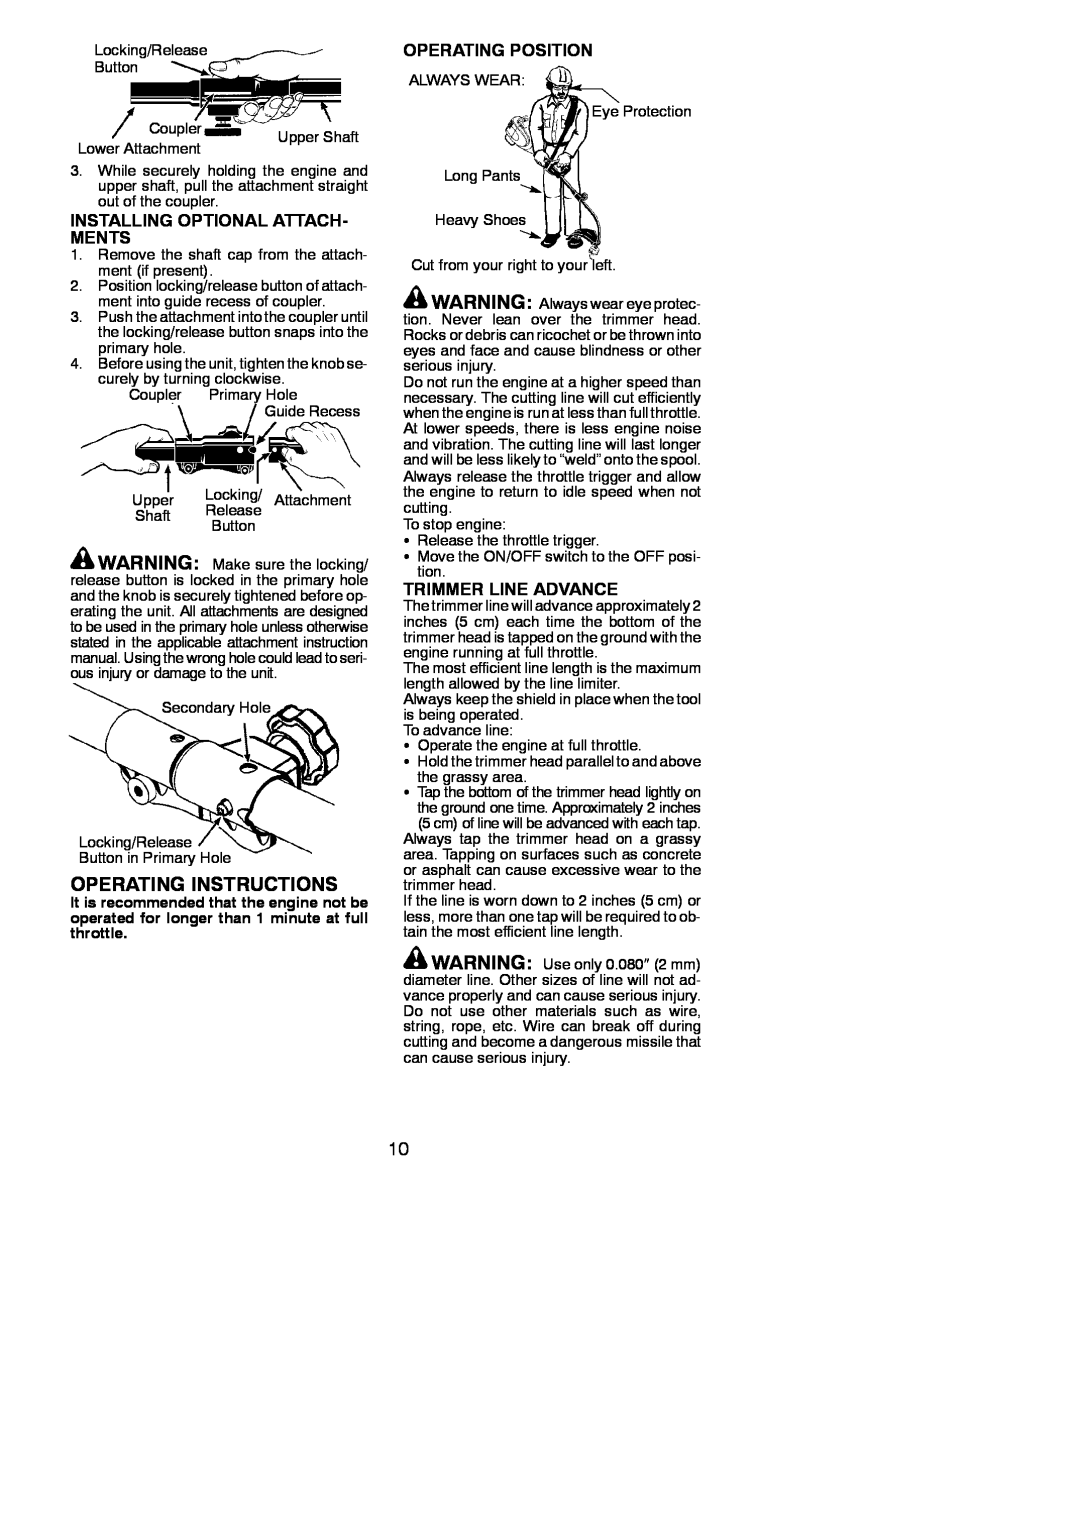 Poulan 545137276 Operating Instructions, Installing Optional Attach- Ments, Operating Position, Trimmer Line Advance 